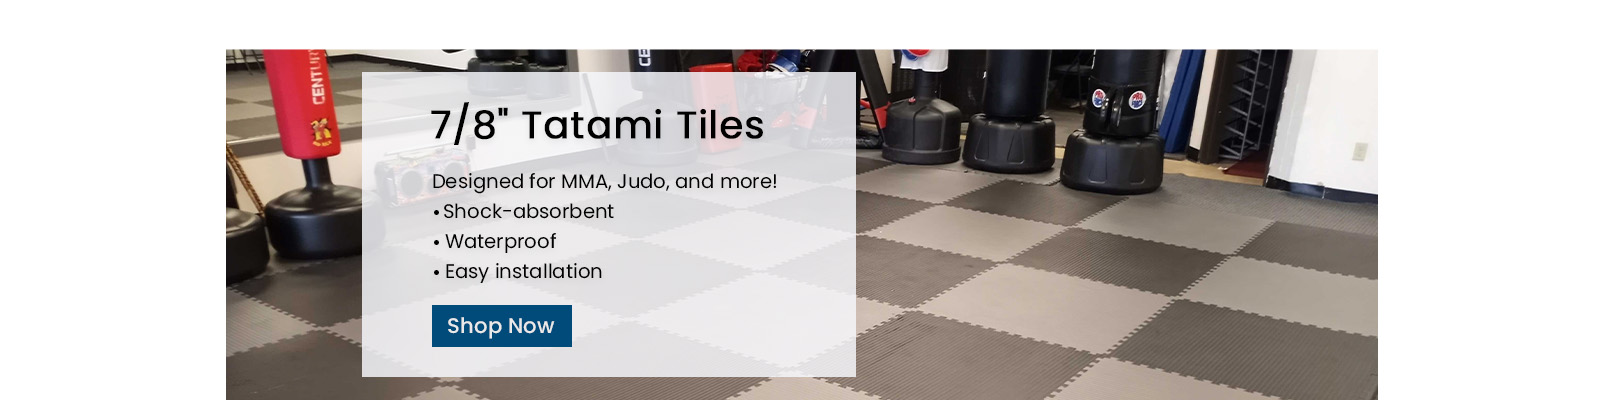 7 slash 8 inch Tatami Tiles. Designed for MMA, Judo, and more. Shock absorbent. Waterproof. Easy installation. Shop Now